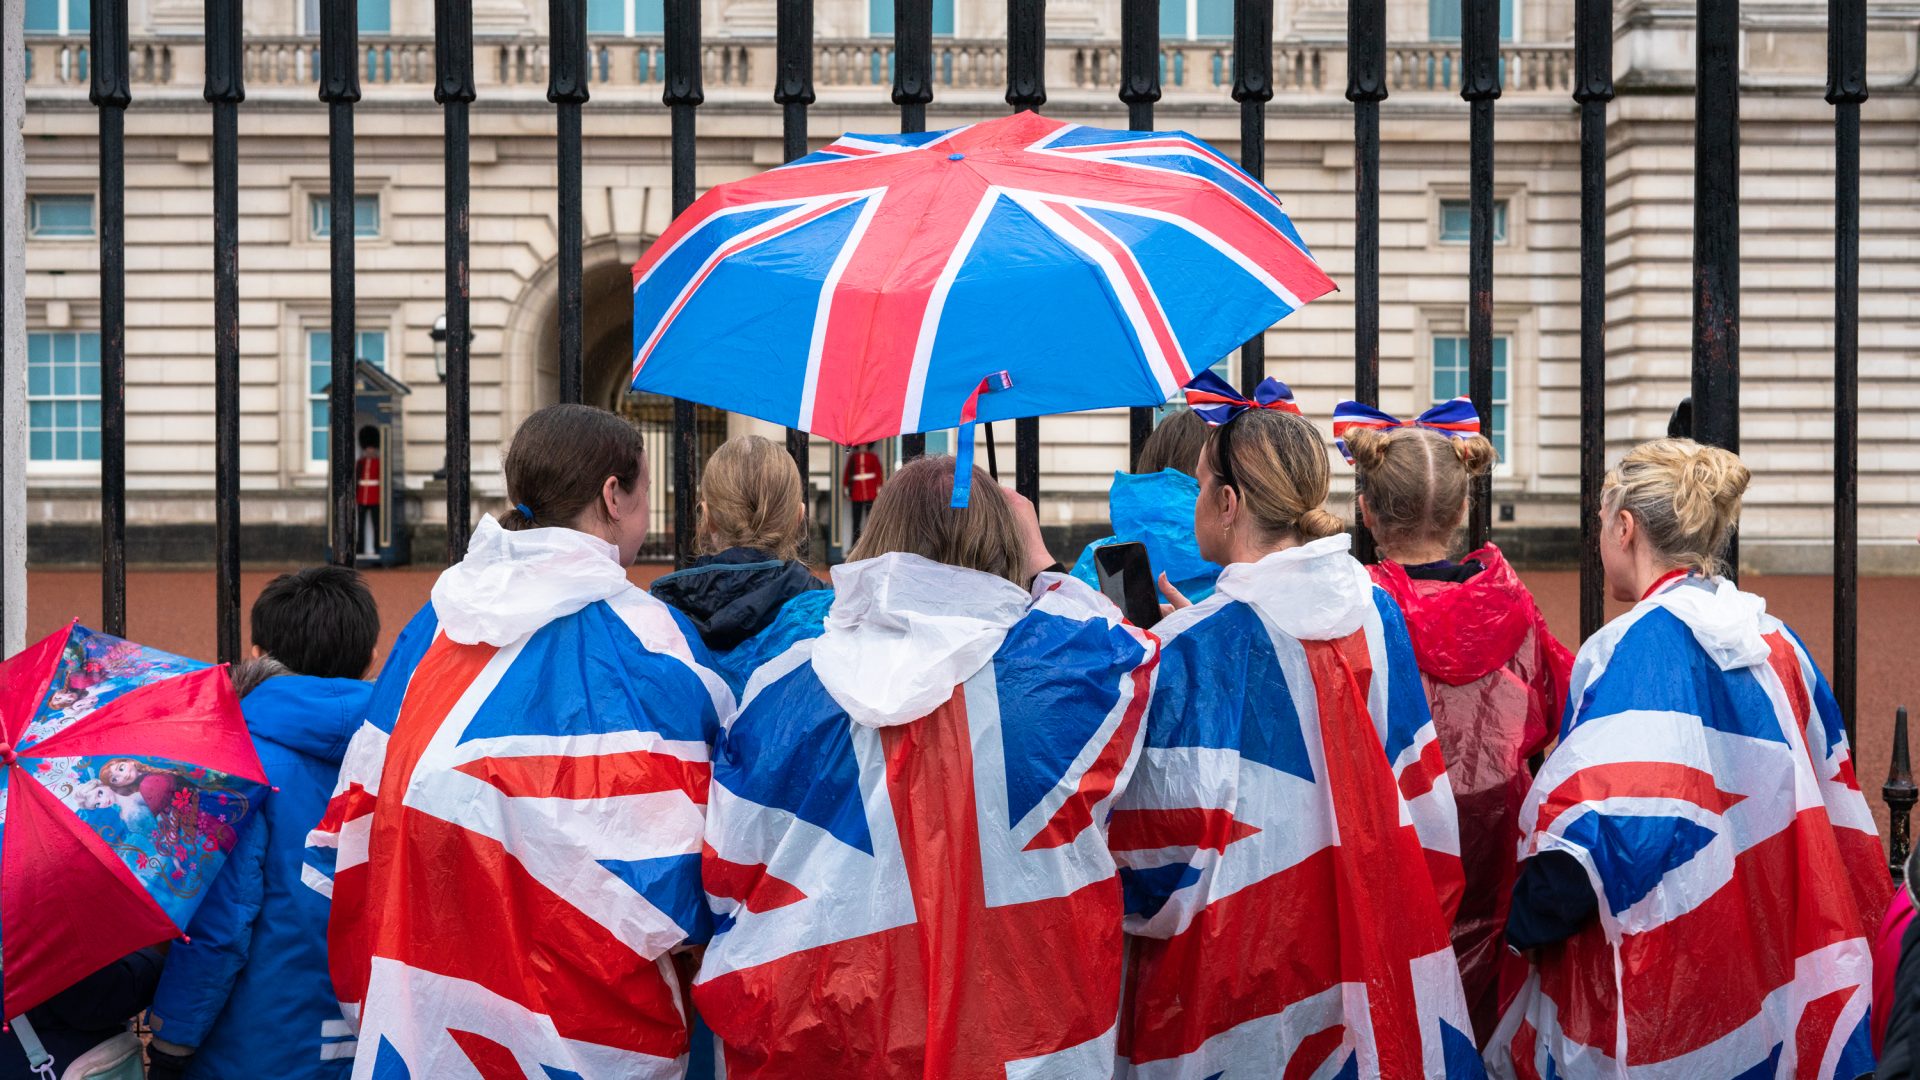 A small crowd wearing Union Jack capes and holding a Union Jack umbrella in front of the gates at Buckingham Palace.